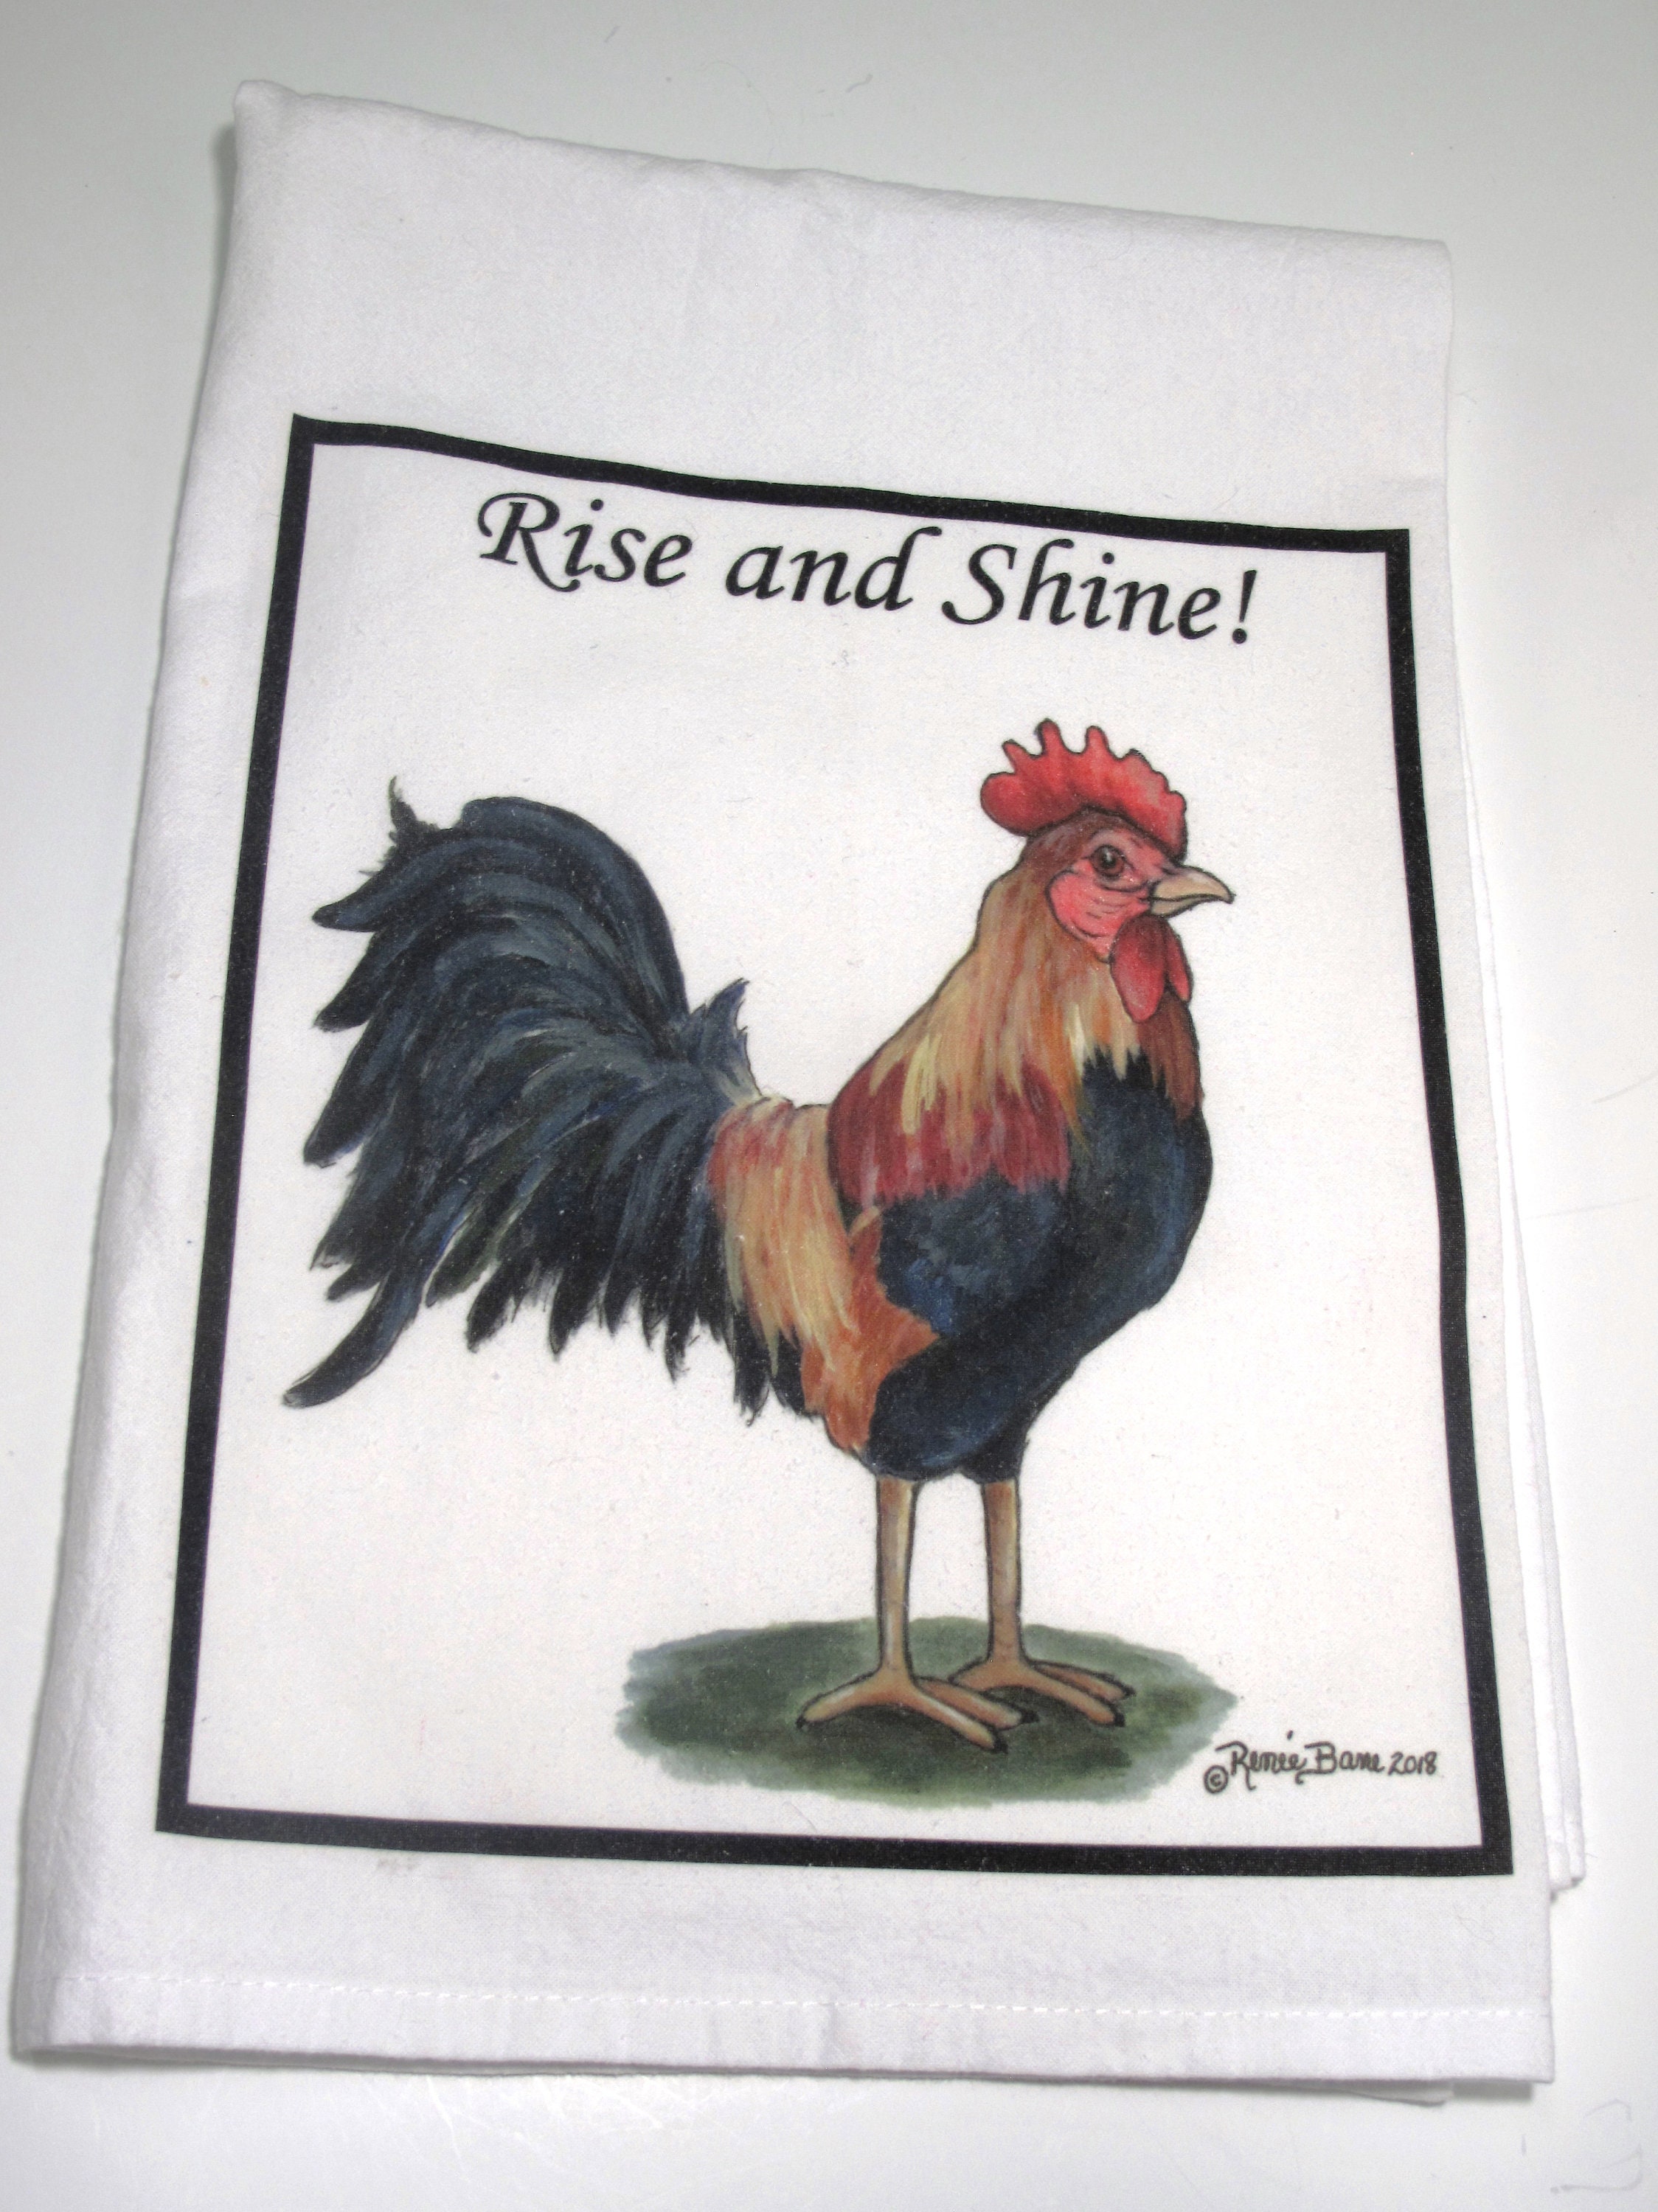 ROOSTERS Large 28x33 Flour Sack Towel Bar Kitchen Gift Organic